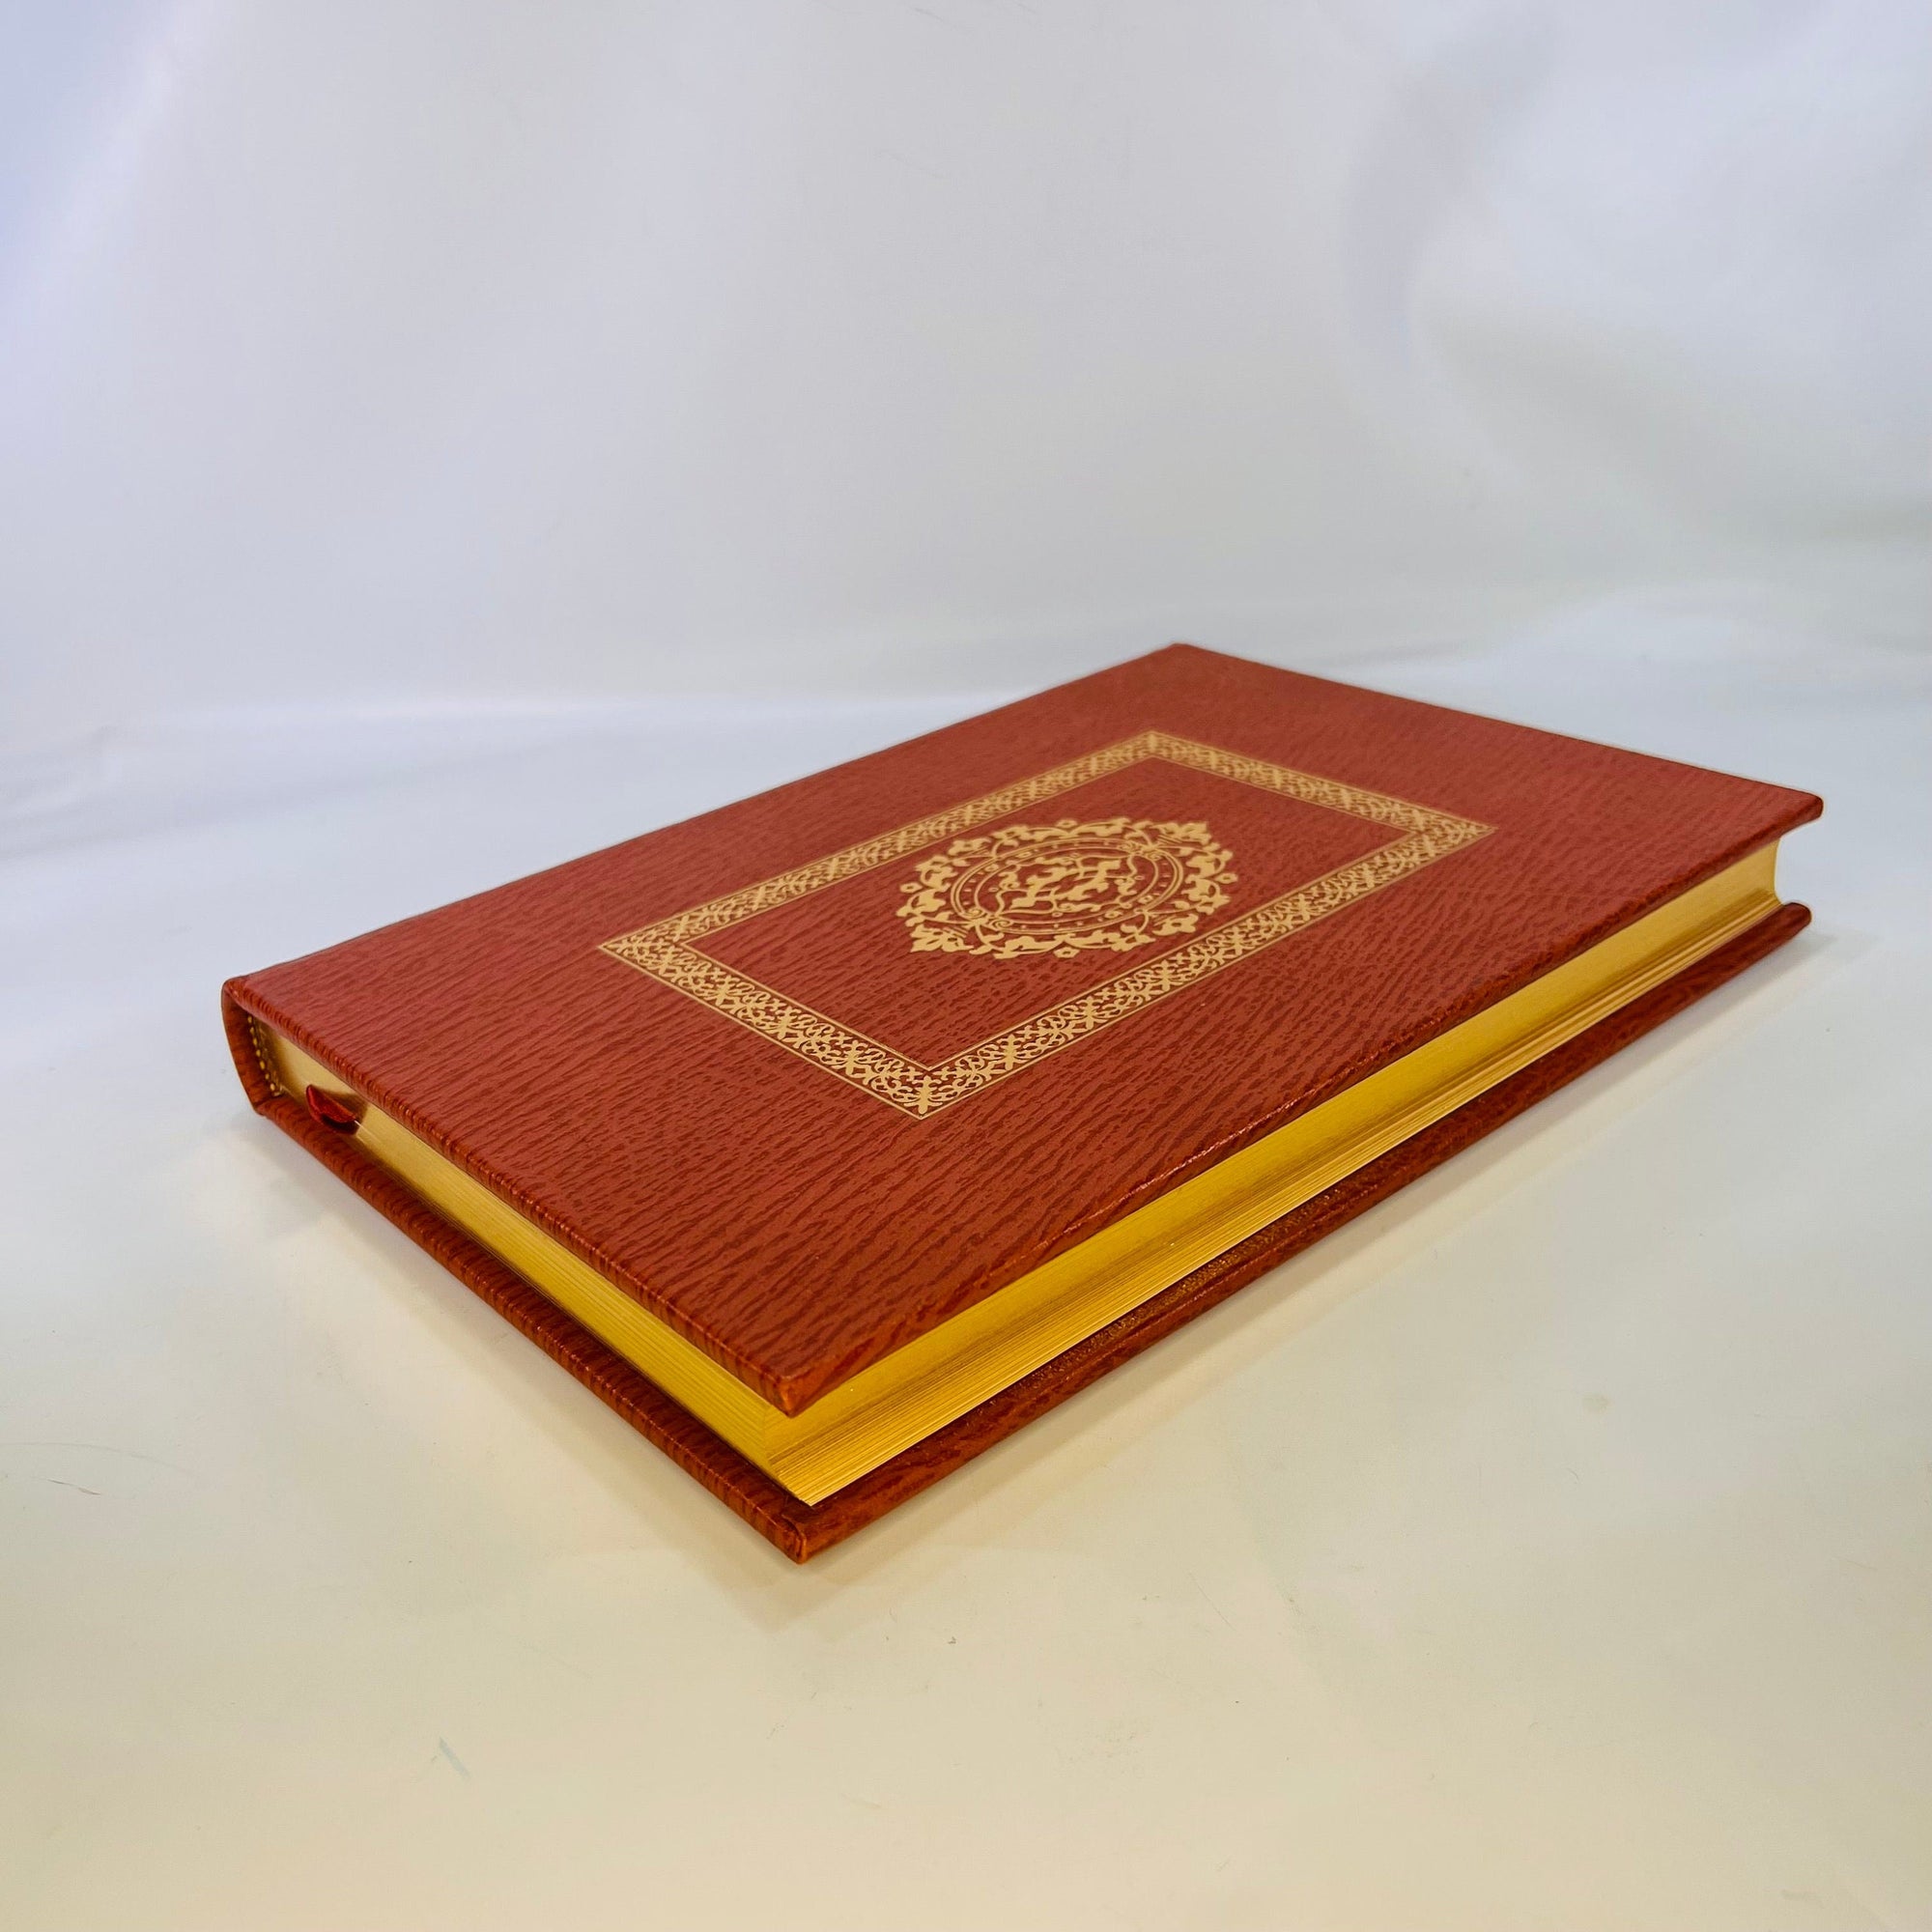 The Red Badge of Courage Stephen Crane 1980 Easton Press part of the 100 Greatest Books